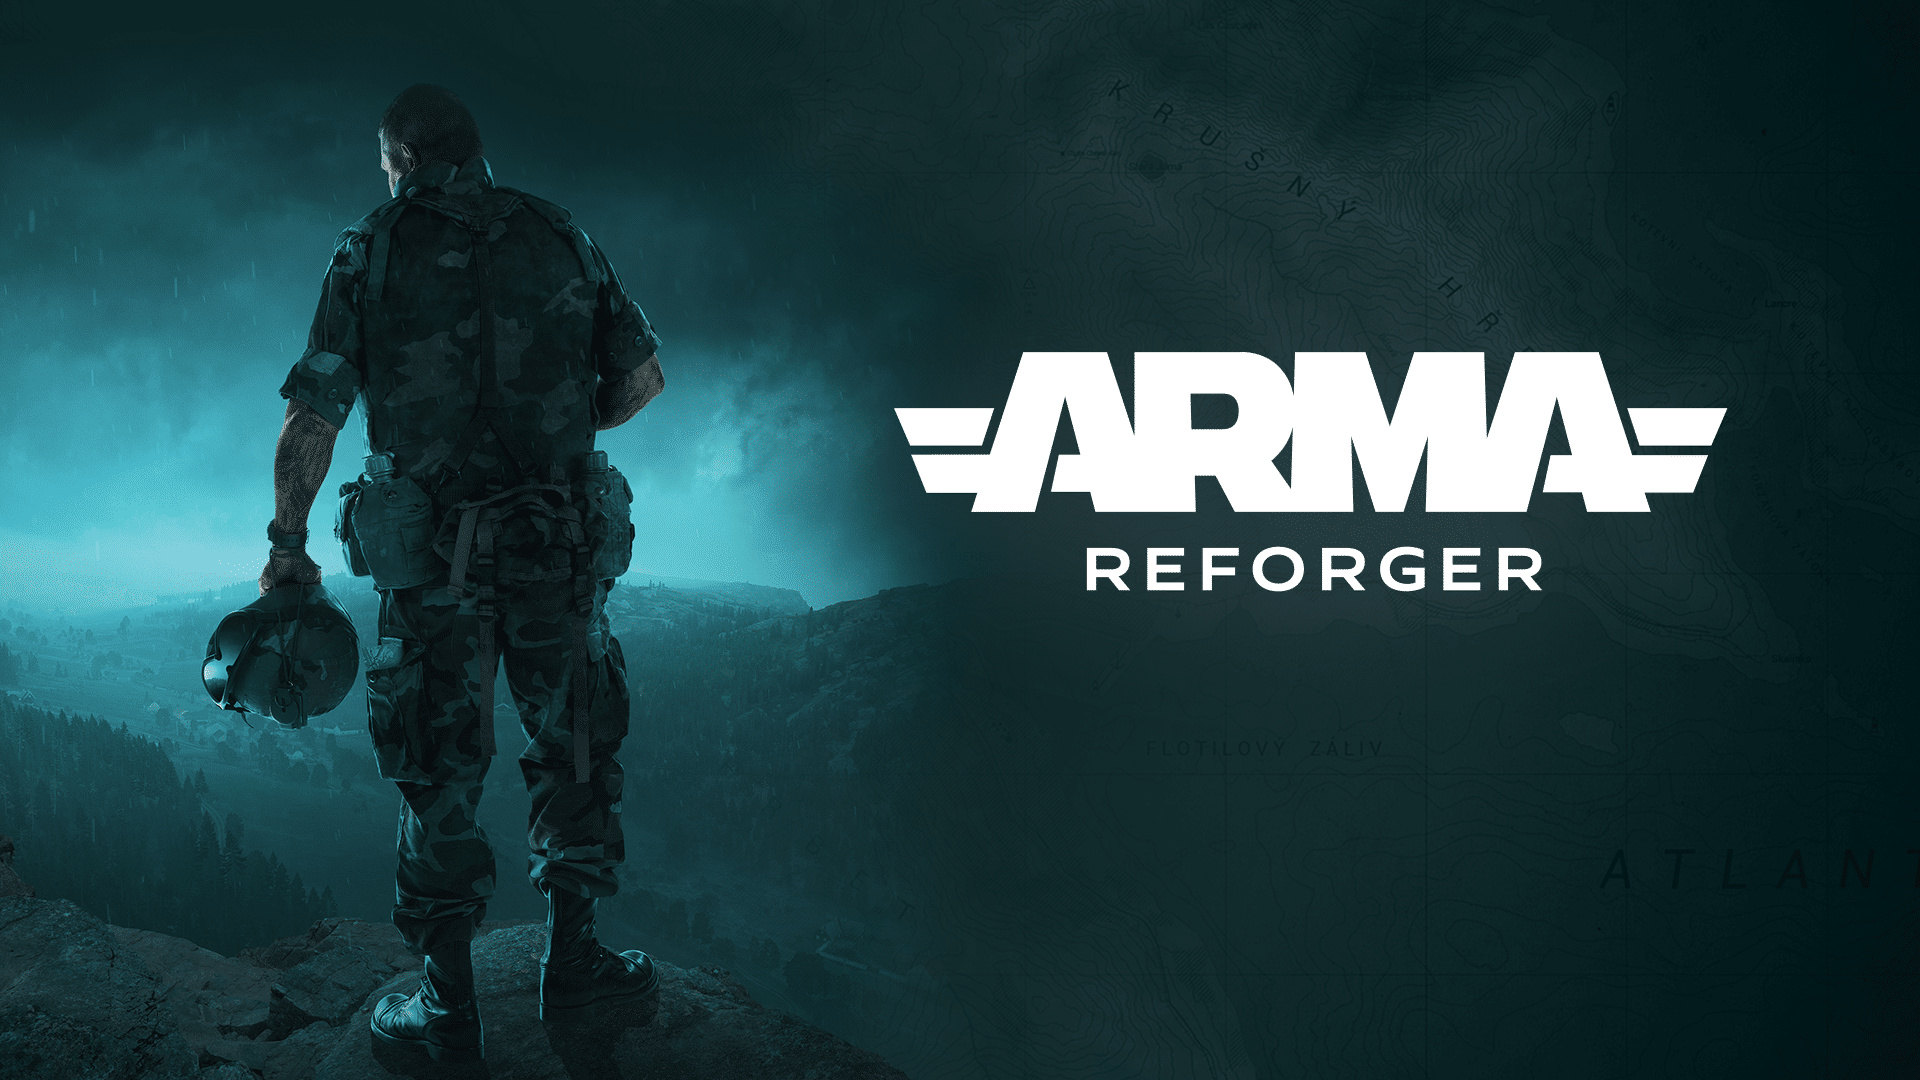 Arma Reforger: Battles in an island landscape covering 51 km², Cold War tactical shooter. 1920x1080 Full HD Background.